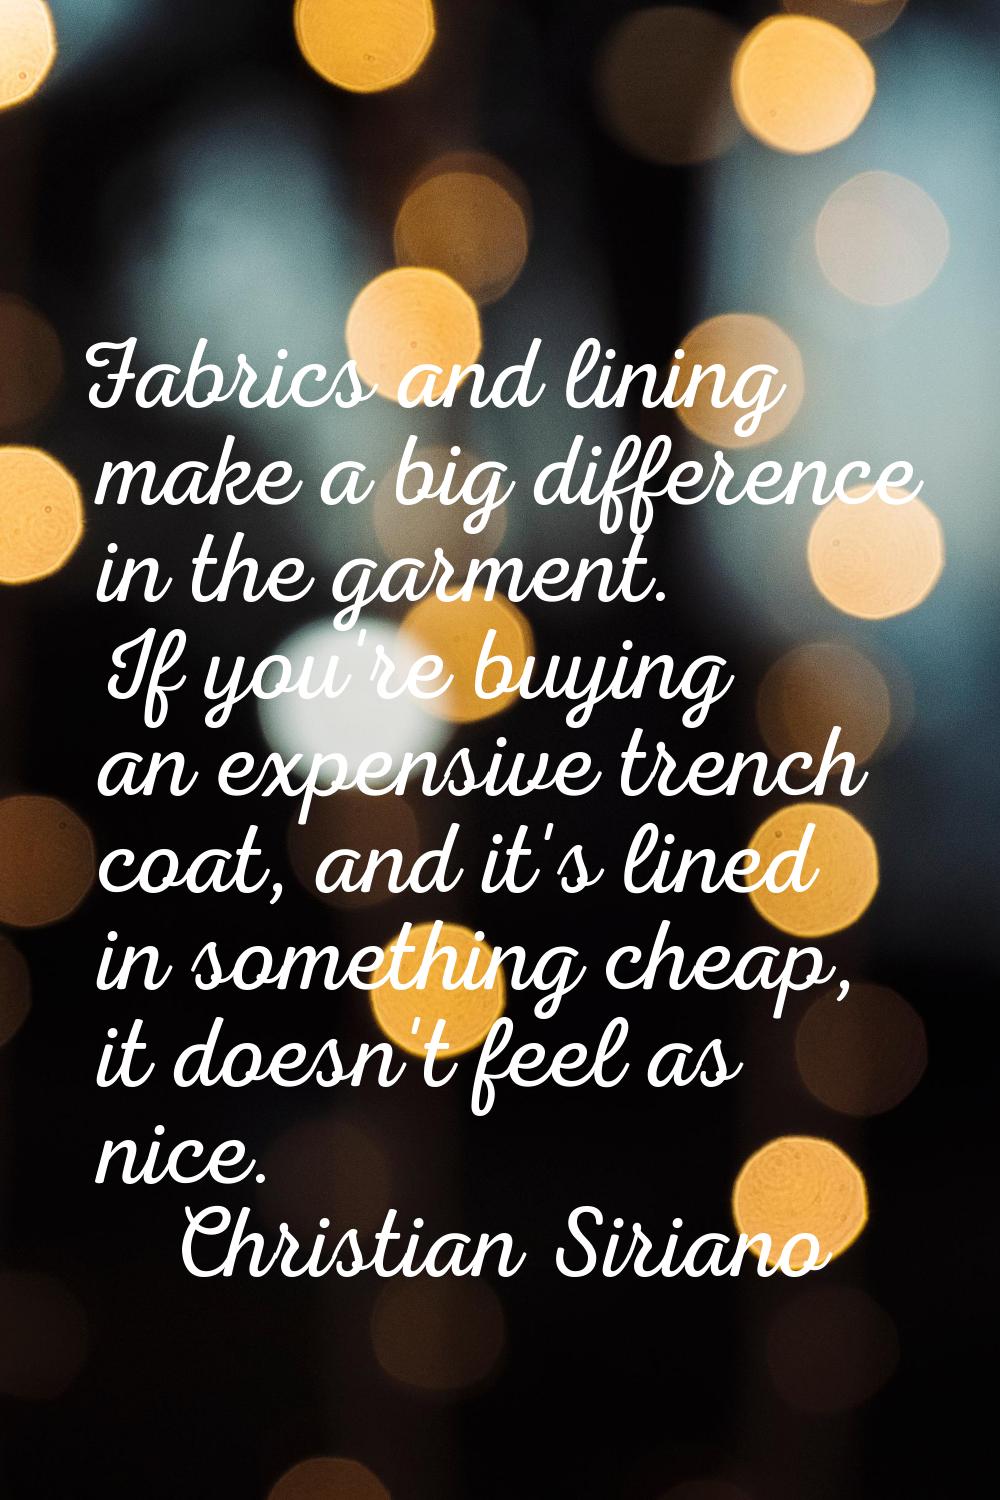 Fabrics and lining make a big difference in the garment. If you're buying an expensive trench coat,